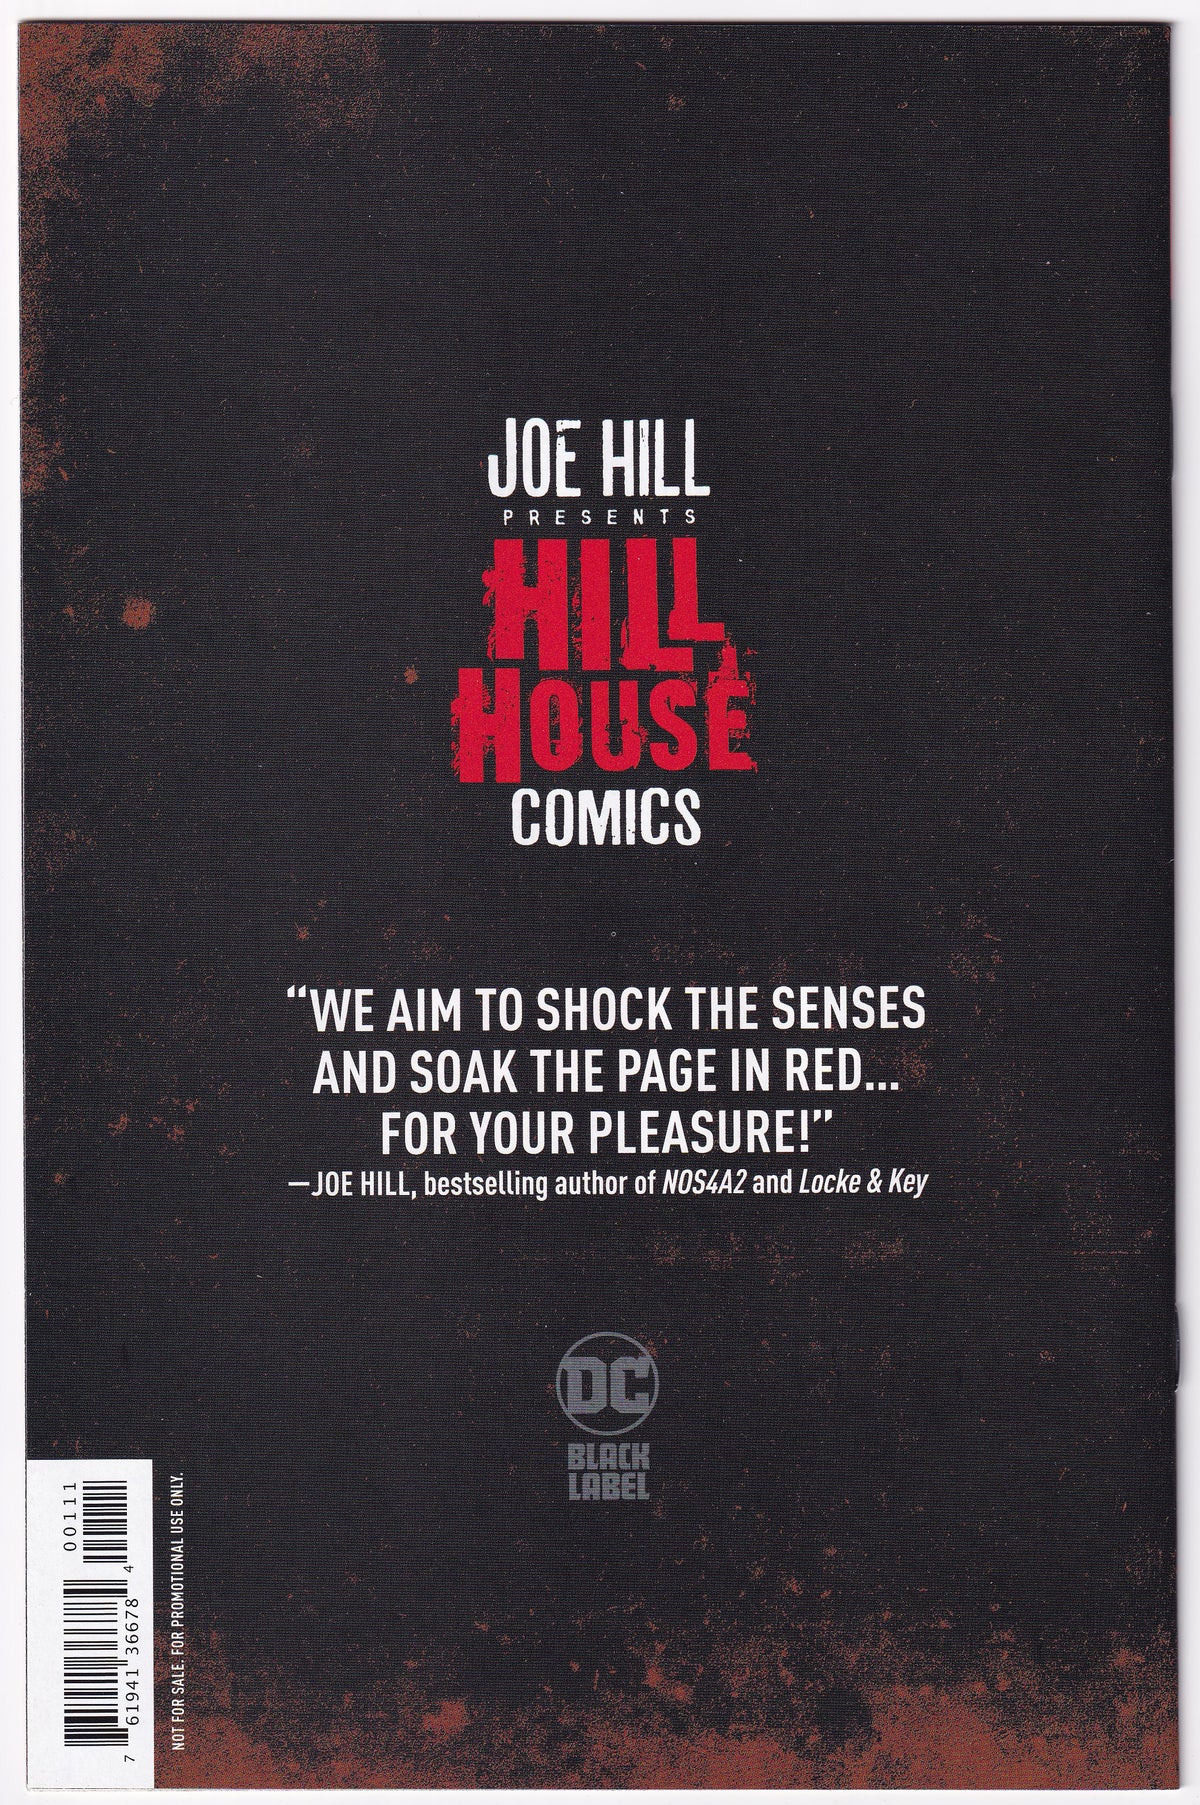 Photo of Hillhouse Comics Sampler  (2019)  Issue 1  Near Mint Comic sold by Stronghold Collectibles